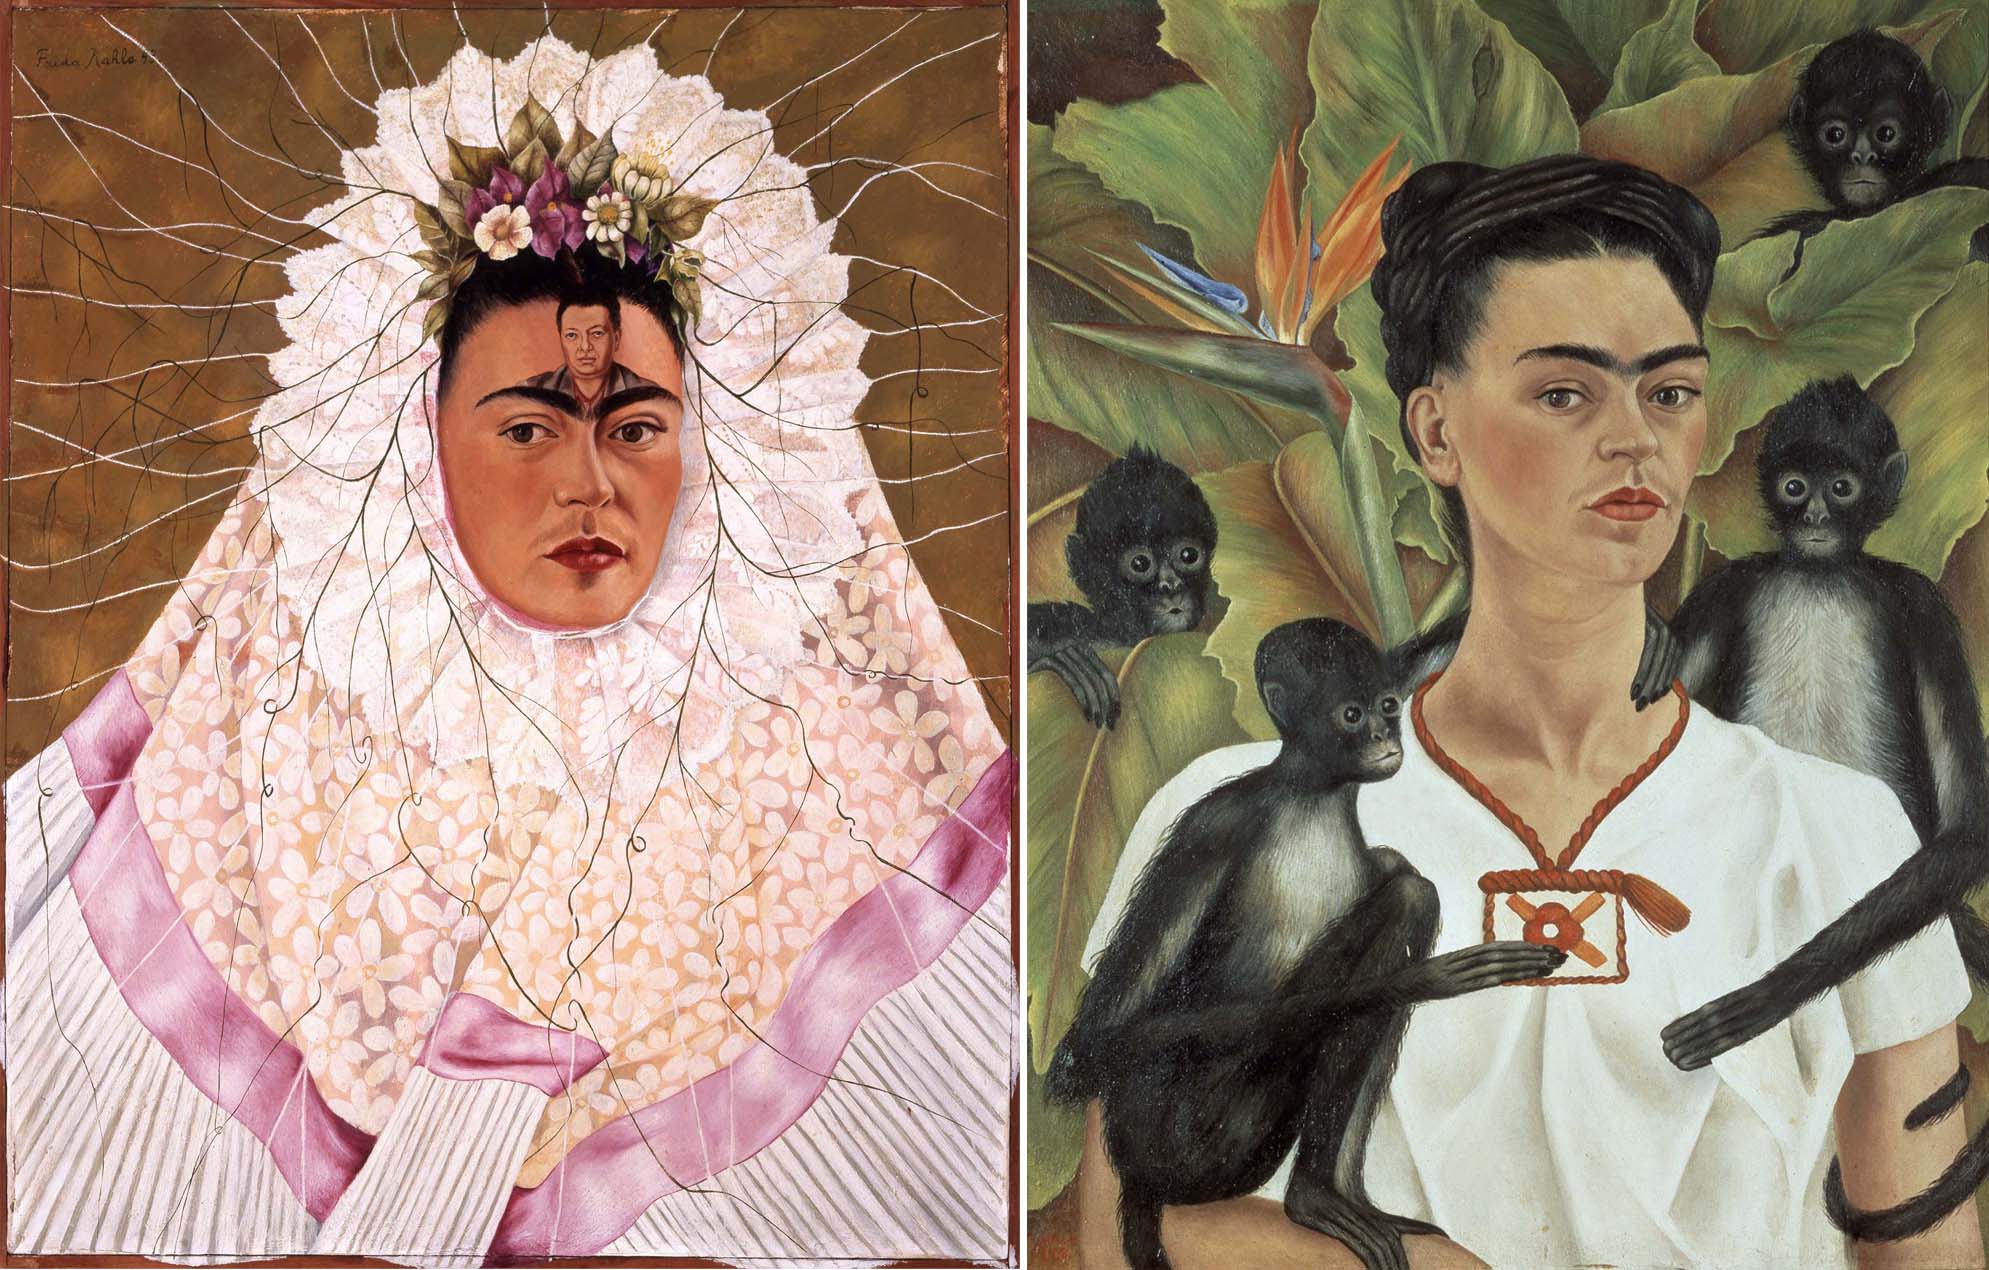 Why does Frida Kahlo’s fame outshine other women artists? | ArtsHub ...